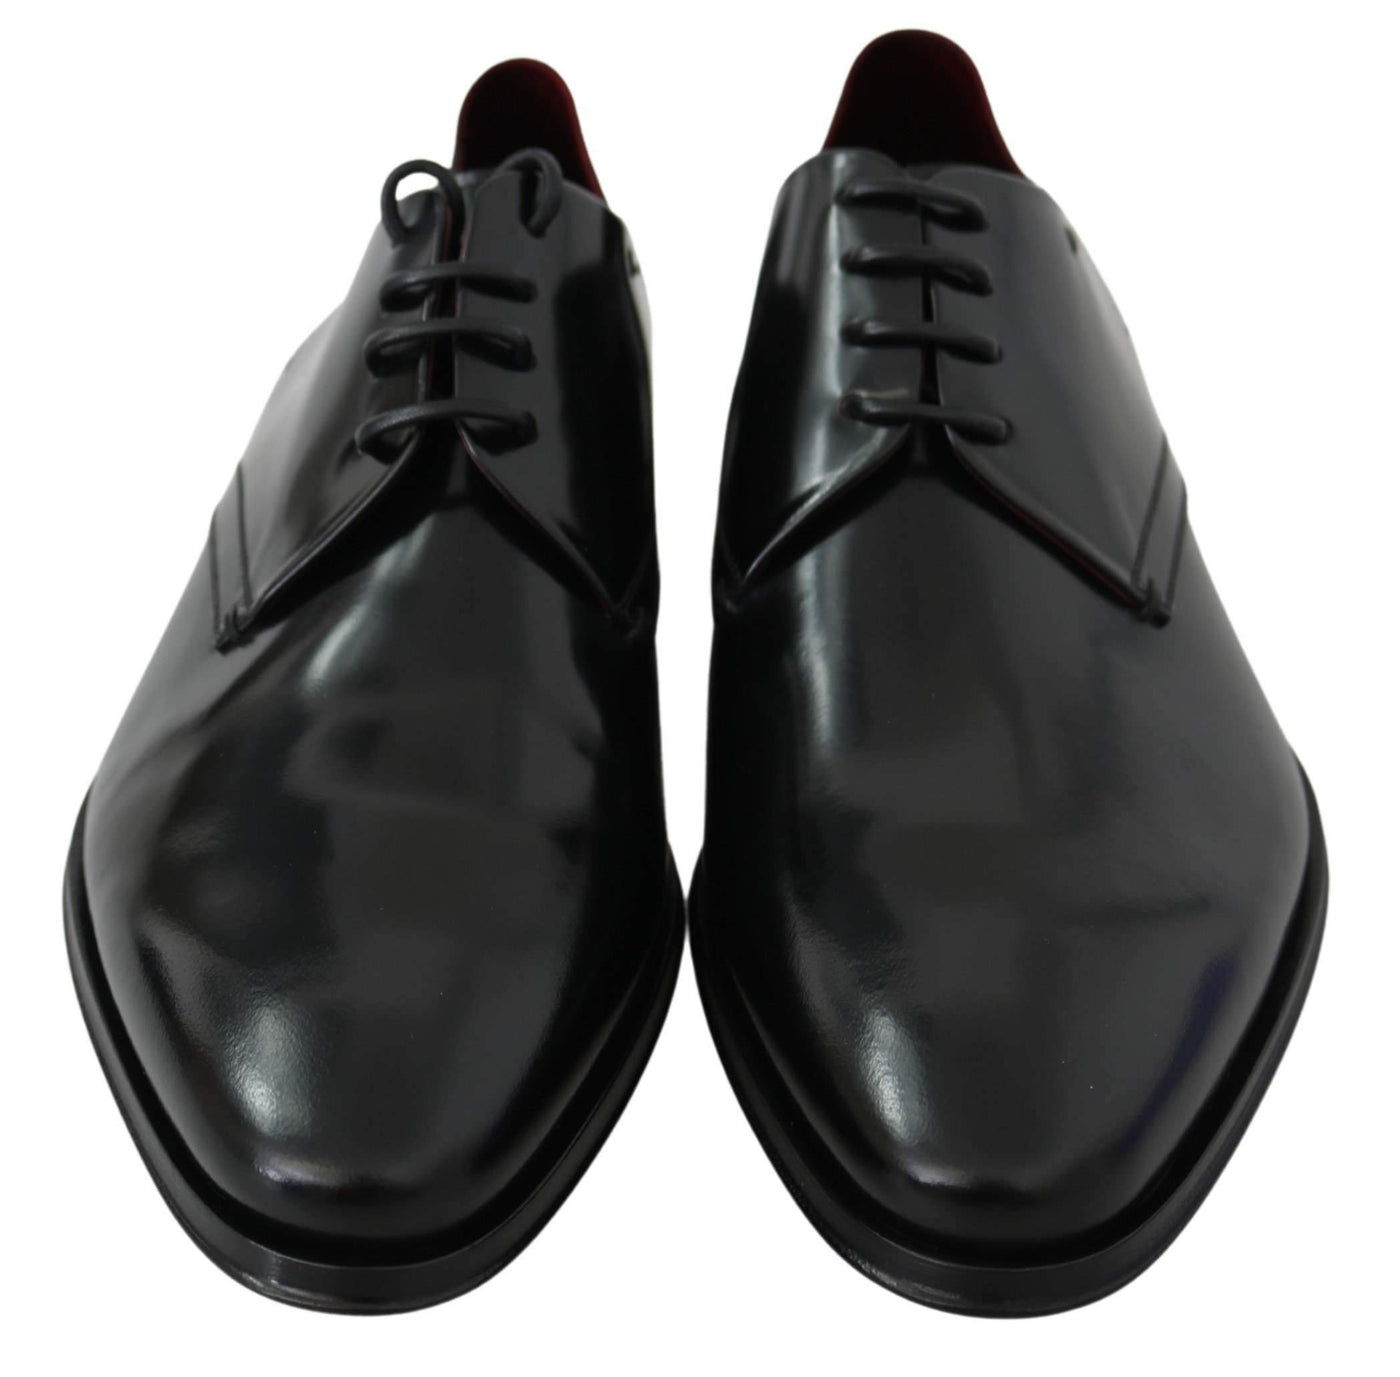 Dolce & Gabbana Black Patent Leather Lace Derby Shoes #men, Black, Brand_Dolce & Gabbana, Dolce & Gabbana, EU41.5/US8.5, EU43/US10, feed-agegroup-adult, feed-color-black, feed-gender-male, feed-size-US10, feed-size-US8.5, Formal - Men - Shoes, Gender_Men, Shoes - New Arrivals at SEYMAYKA